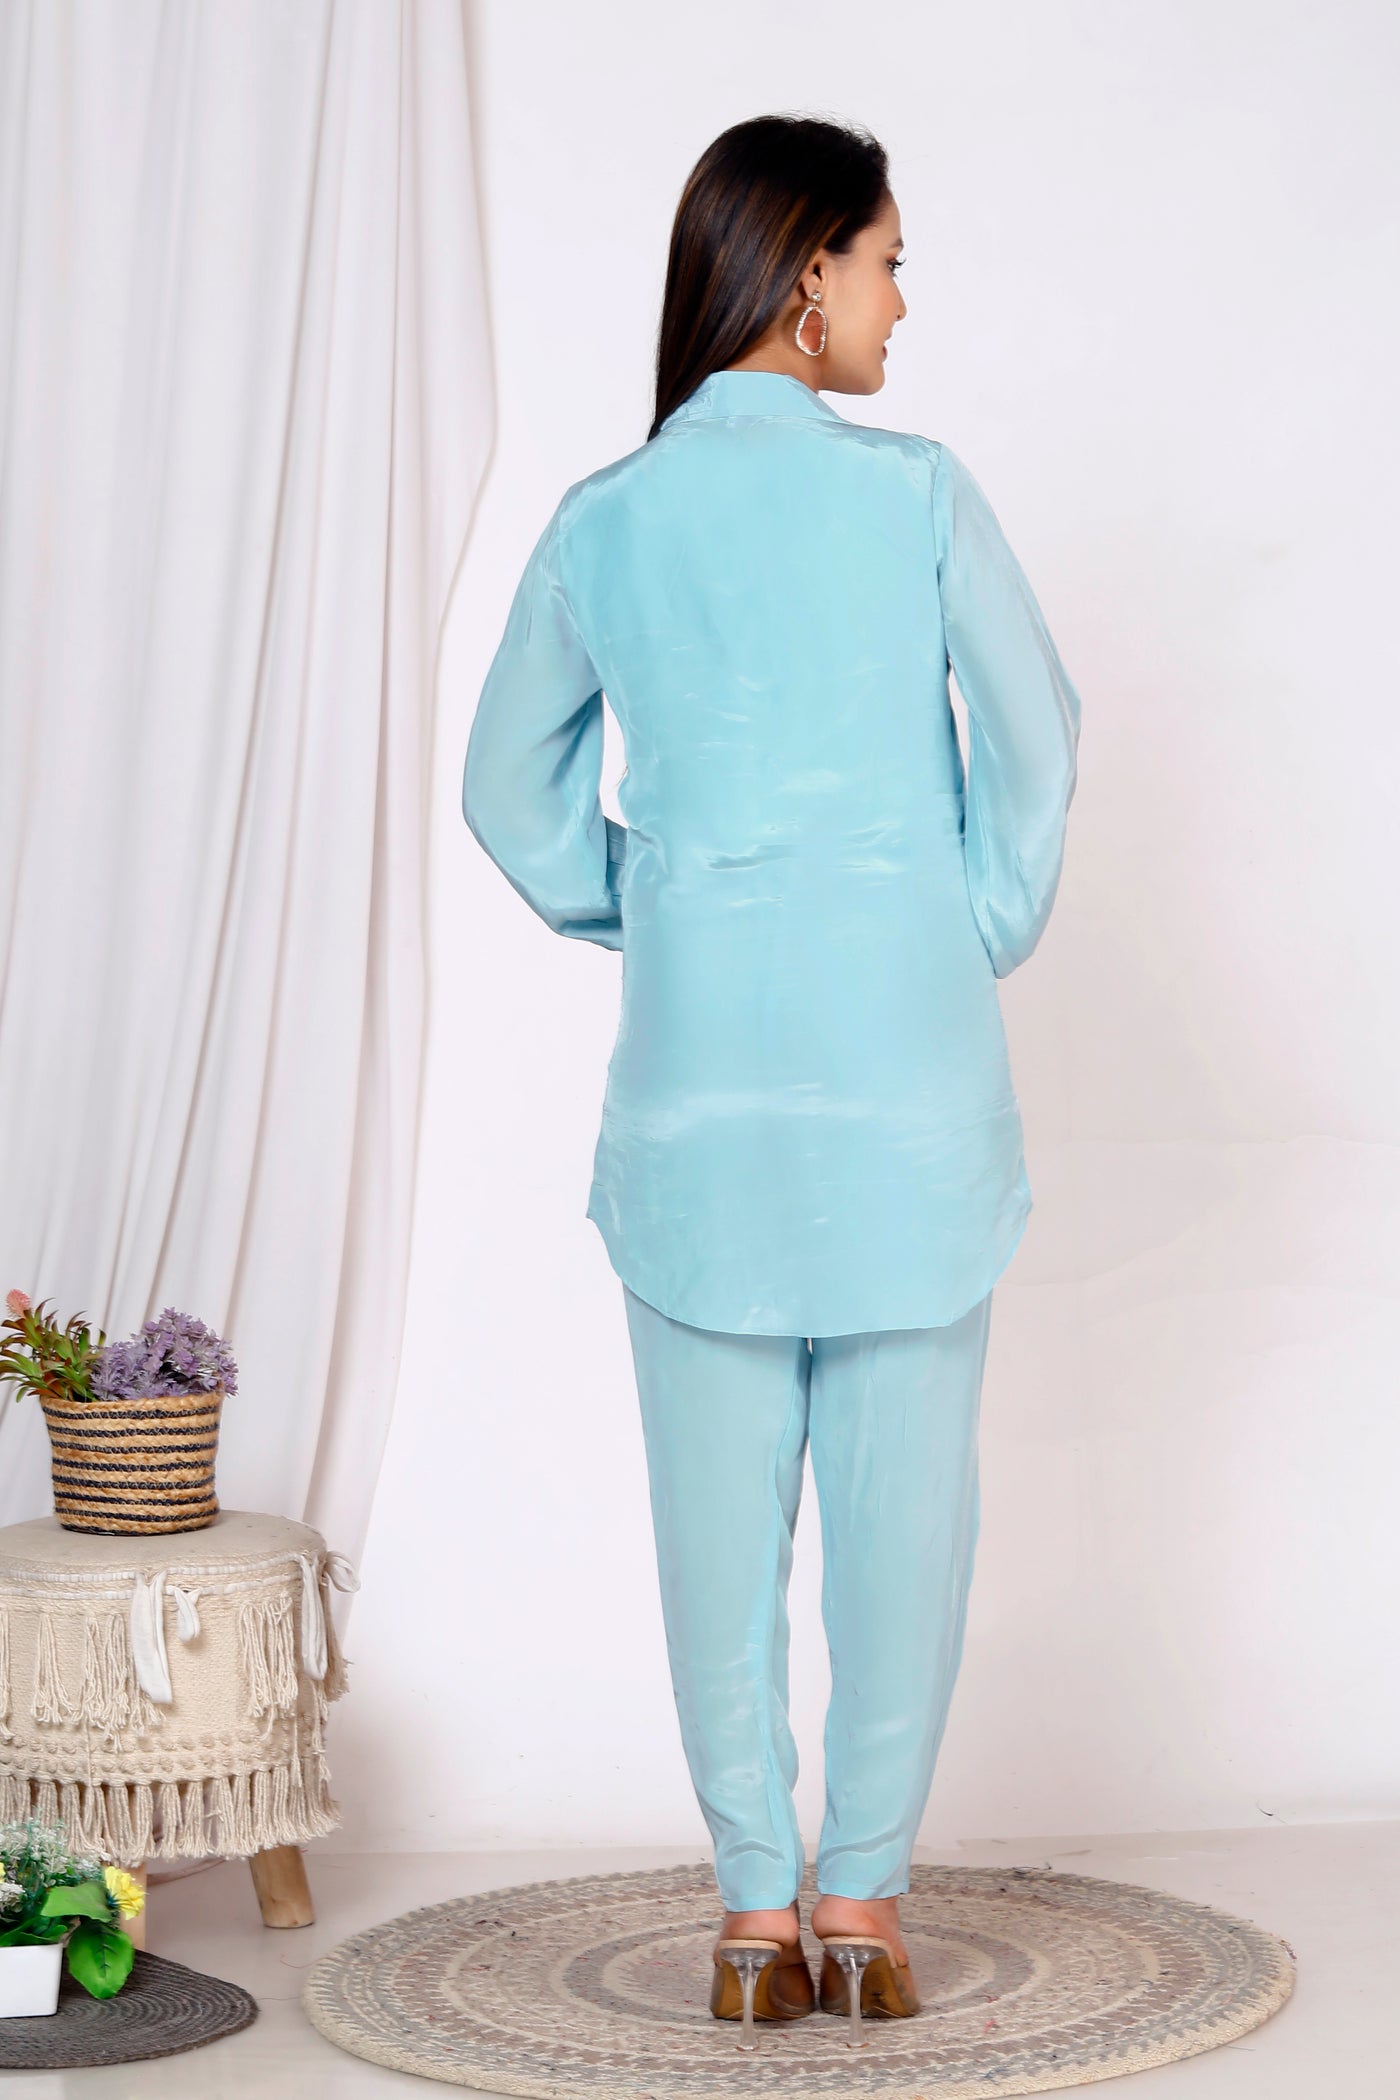 "Sophisticated Sky: Crepe Silk Coord Set in Timeless Blue"